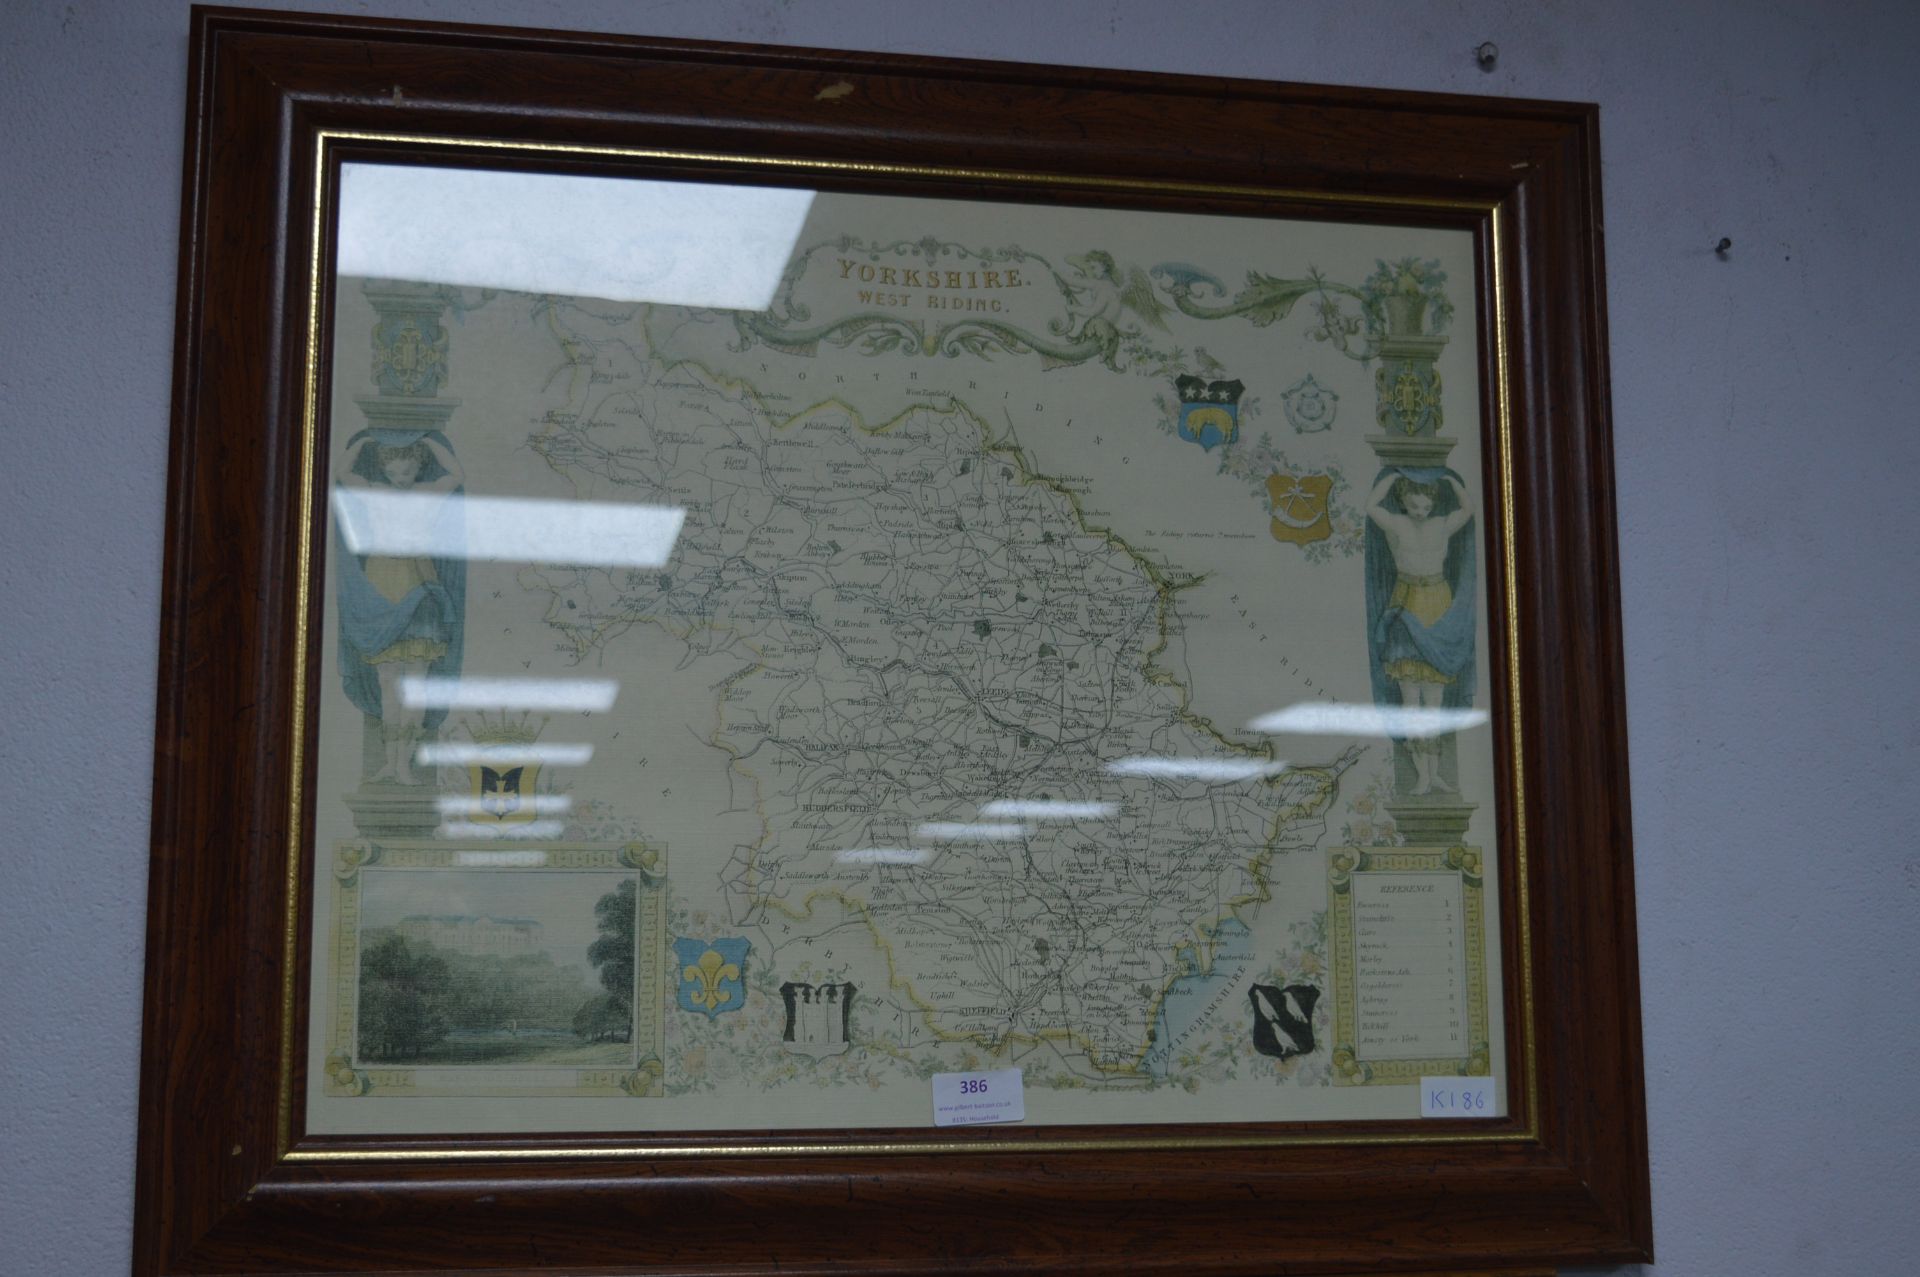 Framed Map of Yorkshire West Riding